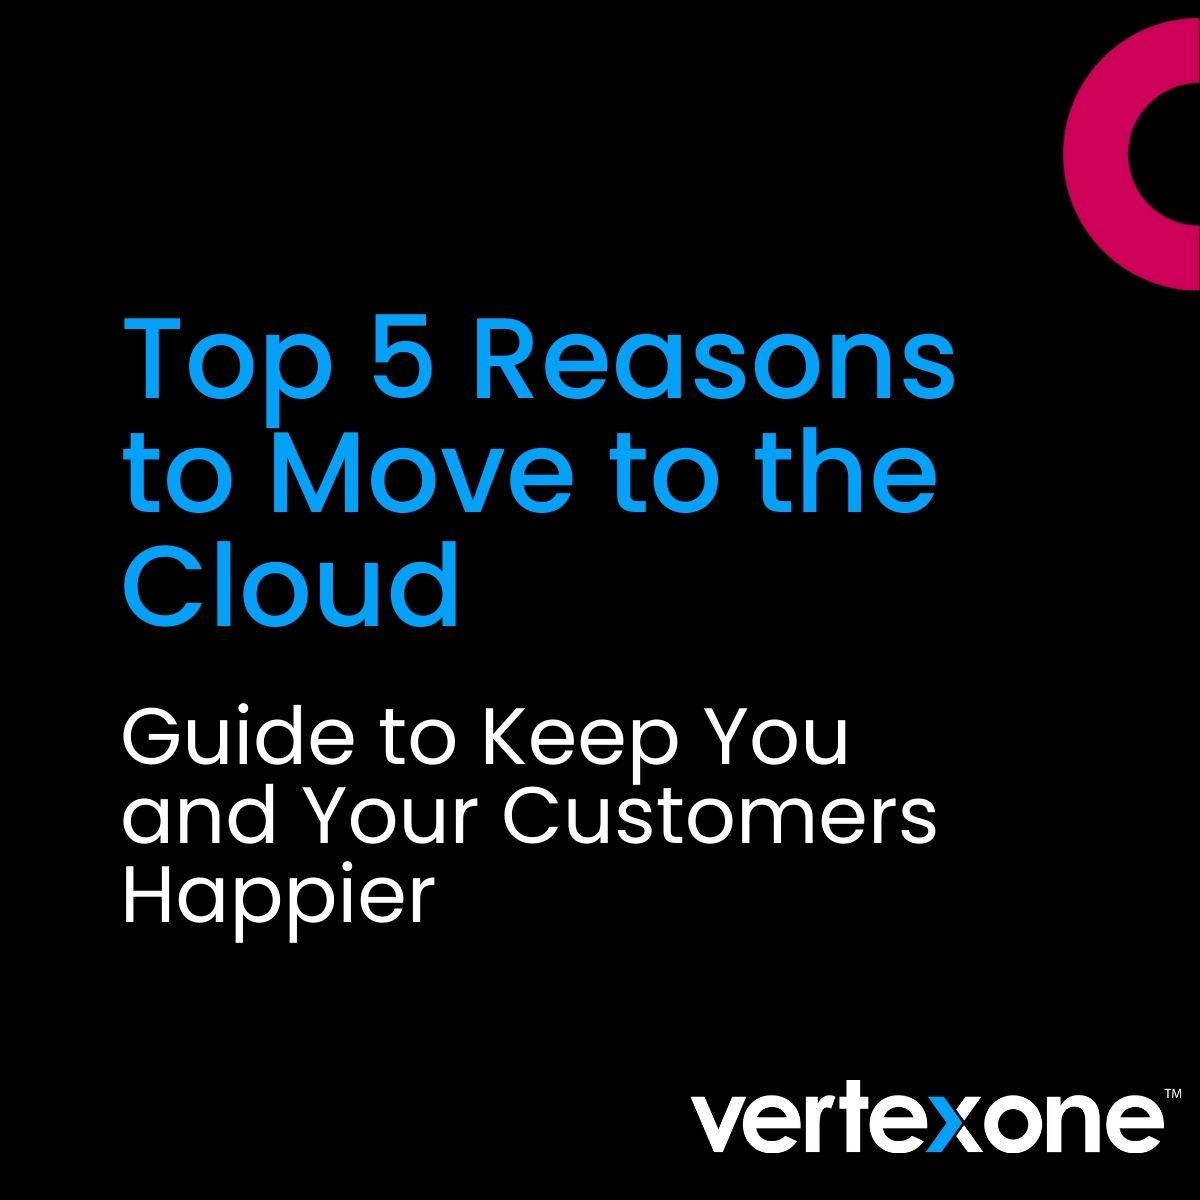 Top 5 Reasons to Move to the Cloud: Guide to Keep You and Your Customers Happier 